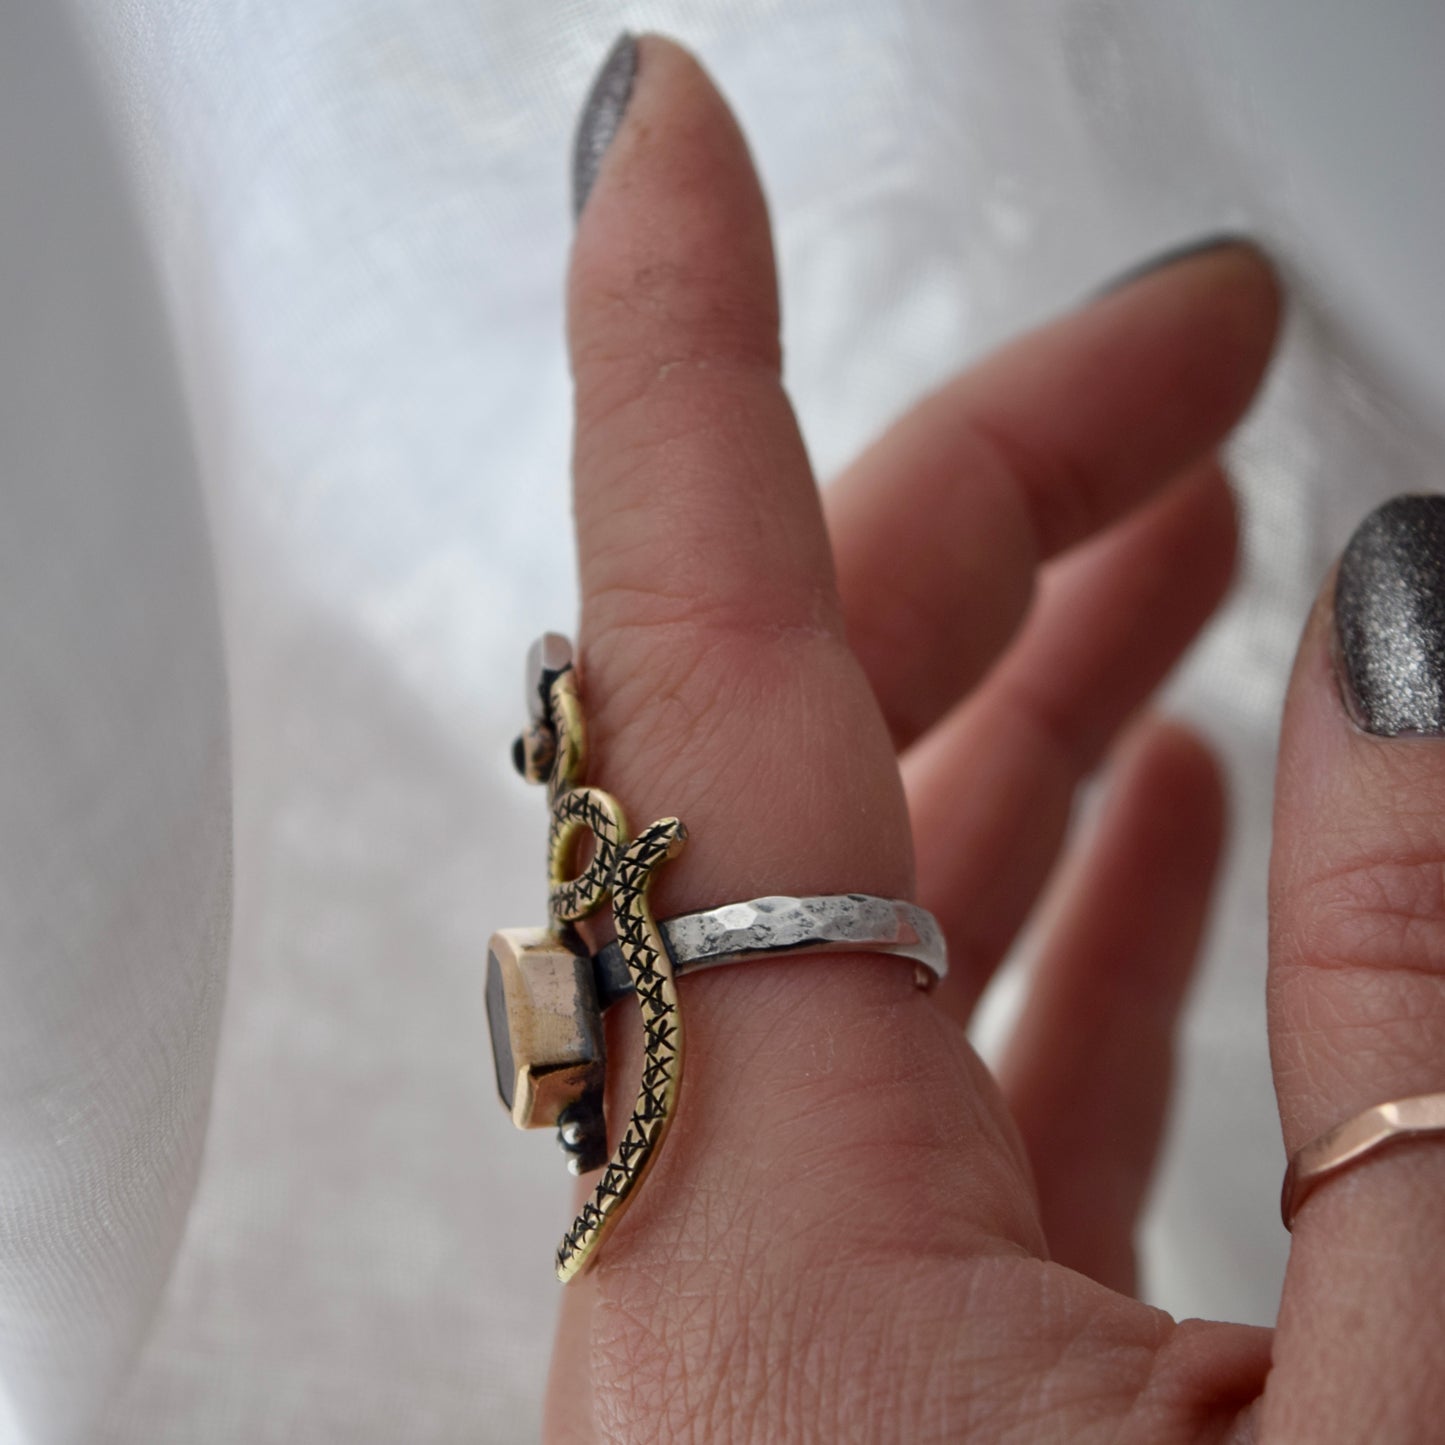 Serpent Ring with Rutilated Quartz, Black Onyx, and Gold Fill Size 8